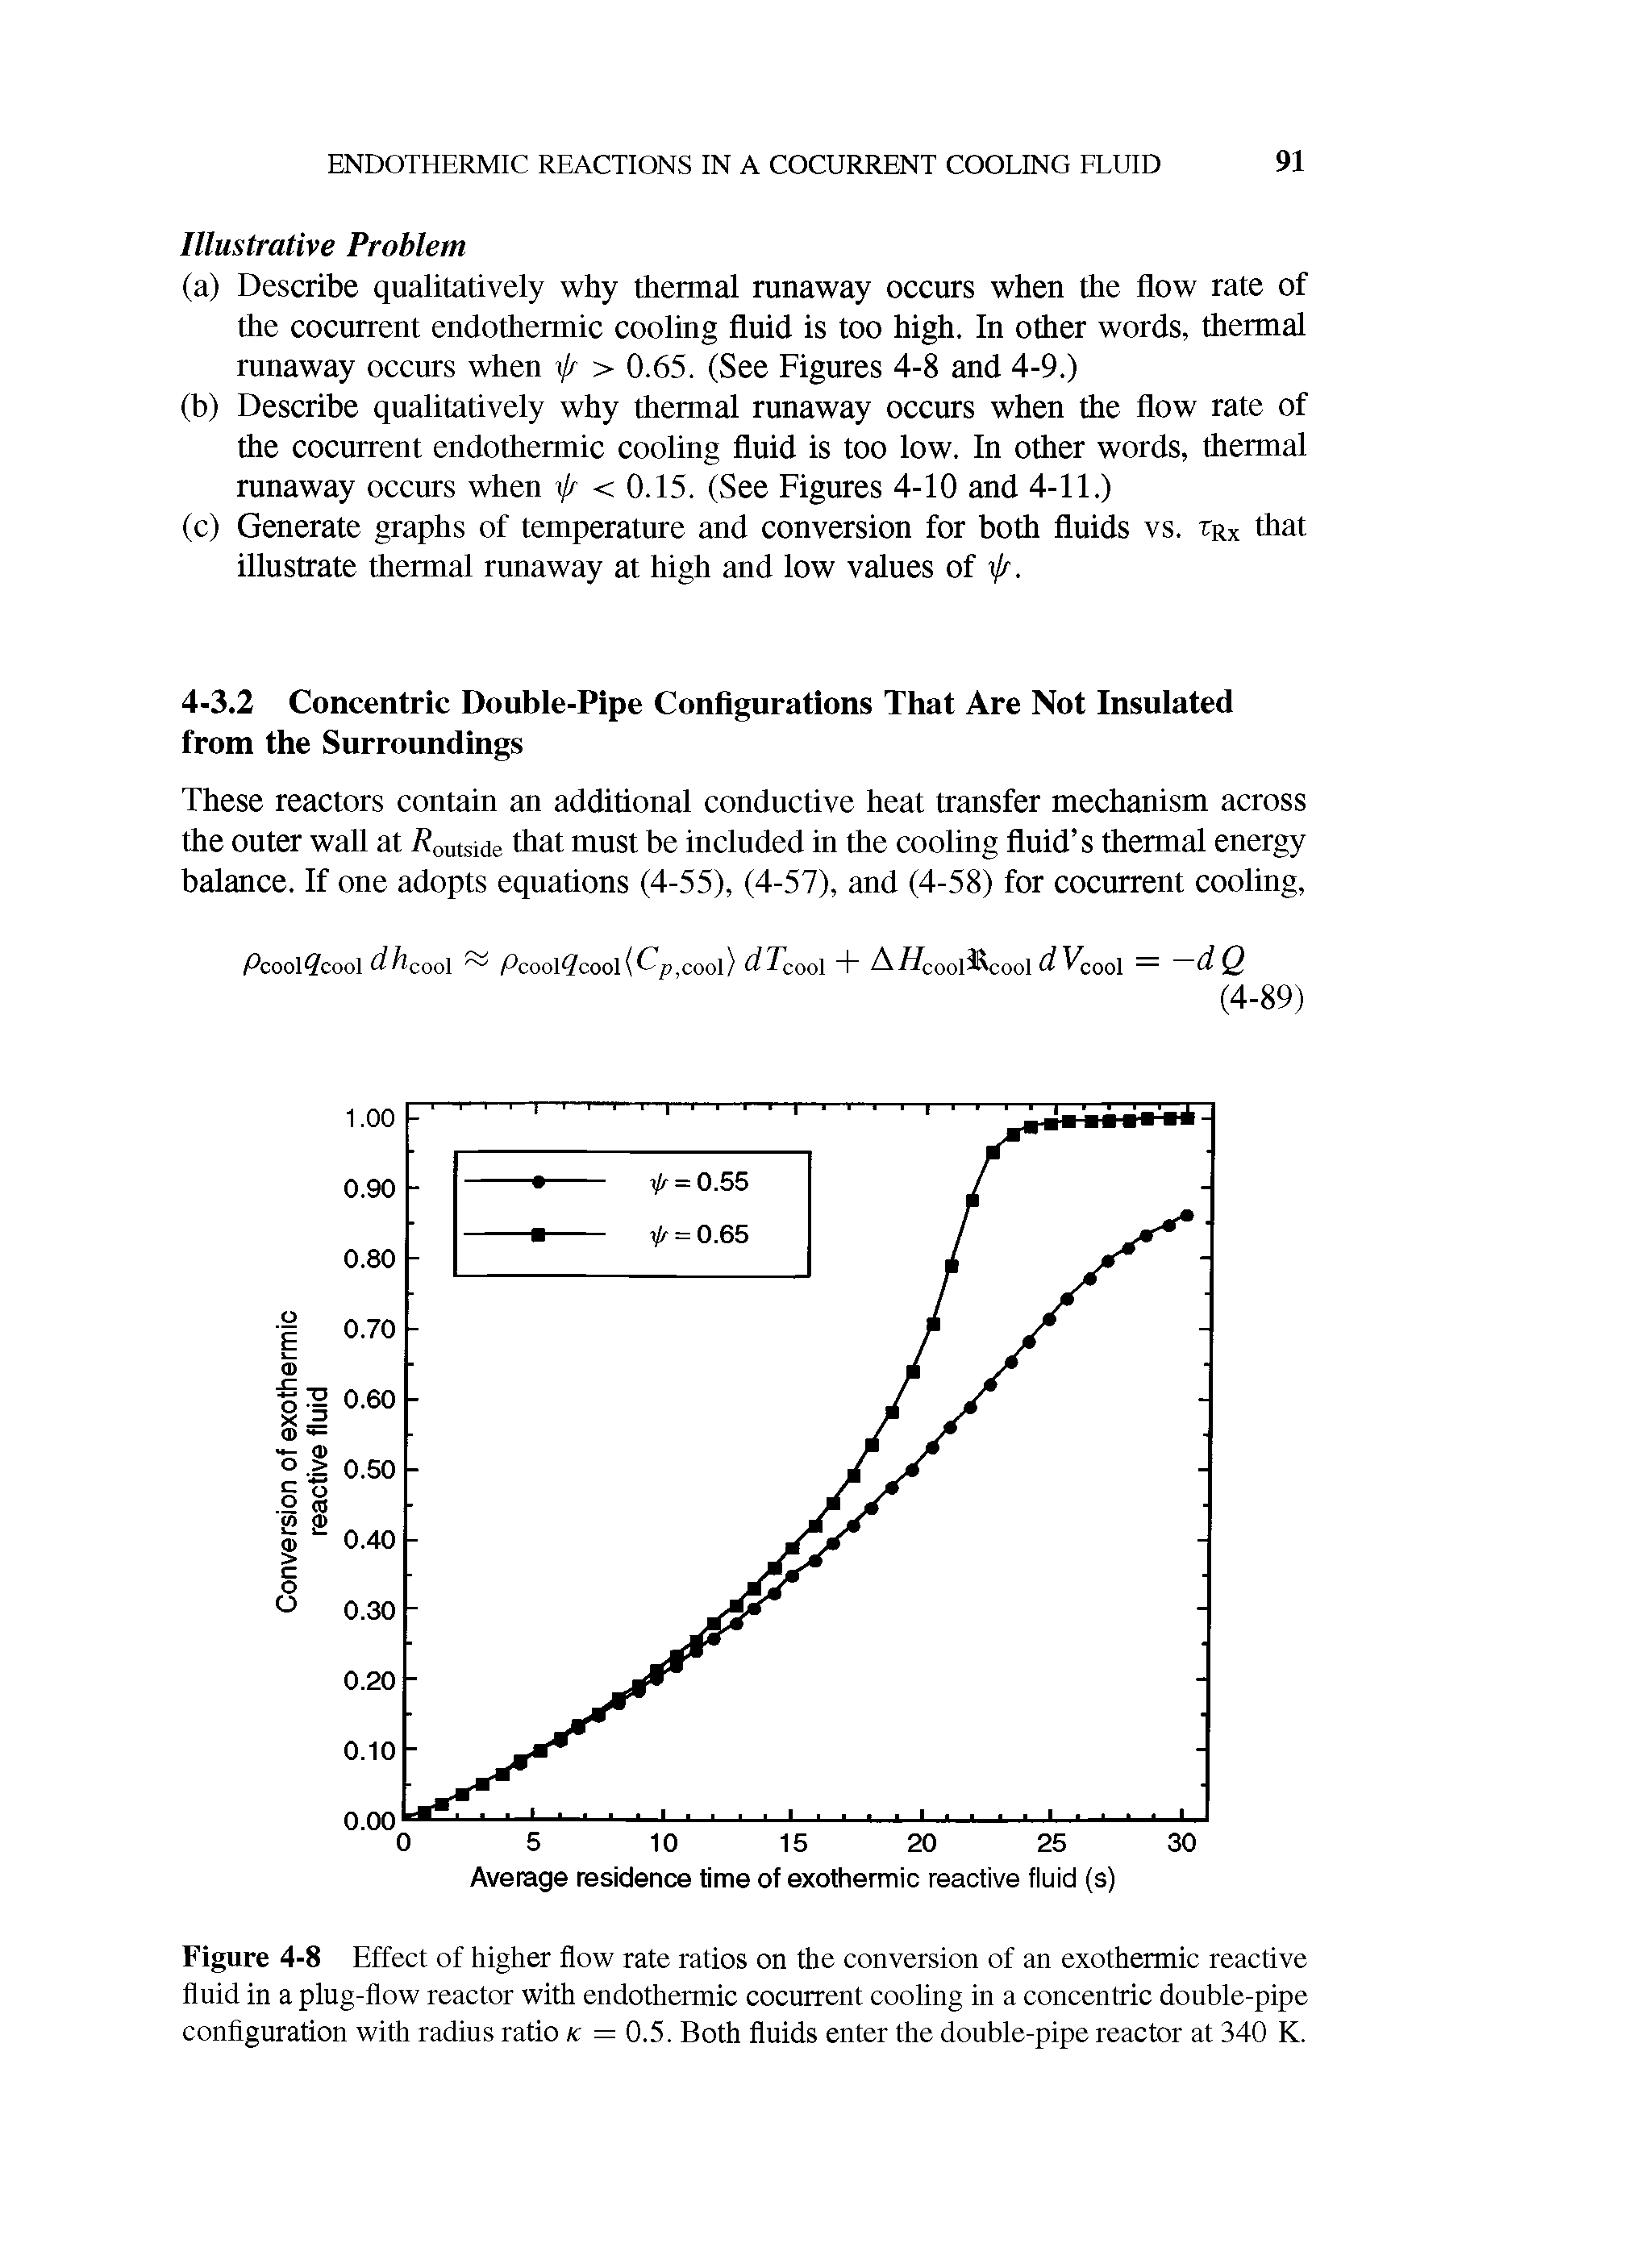 Figure 4-8 Effect of higher flow rate ratios on the conversion of an exothermic reactive fluid in a plug-flow reactor with endothermic cocurrent cooling in a concentric double-pipe configuration with radius ratio k =0.5. Both fluids enter the double-pipe reactor at 340 K.